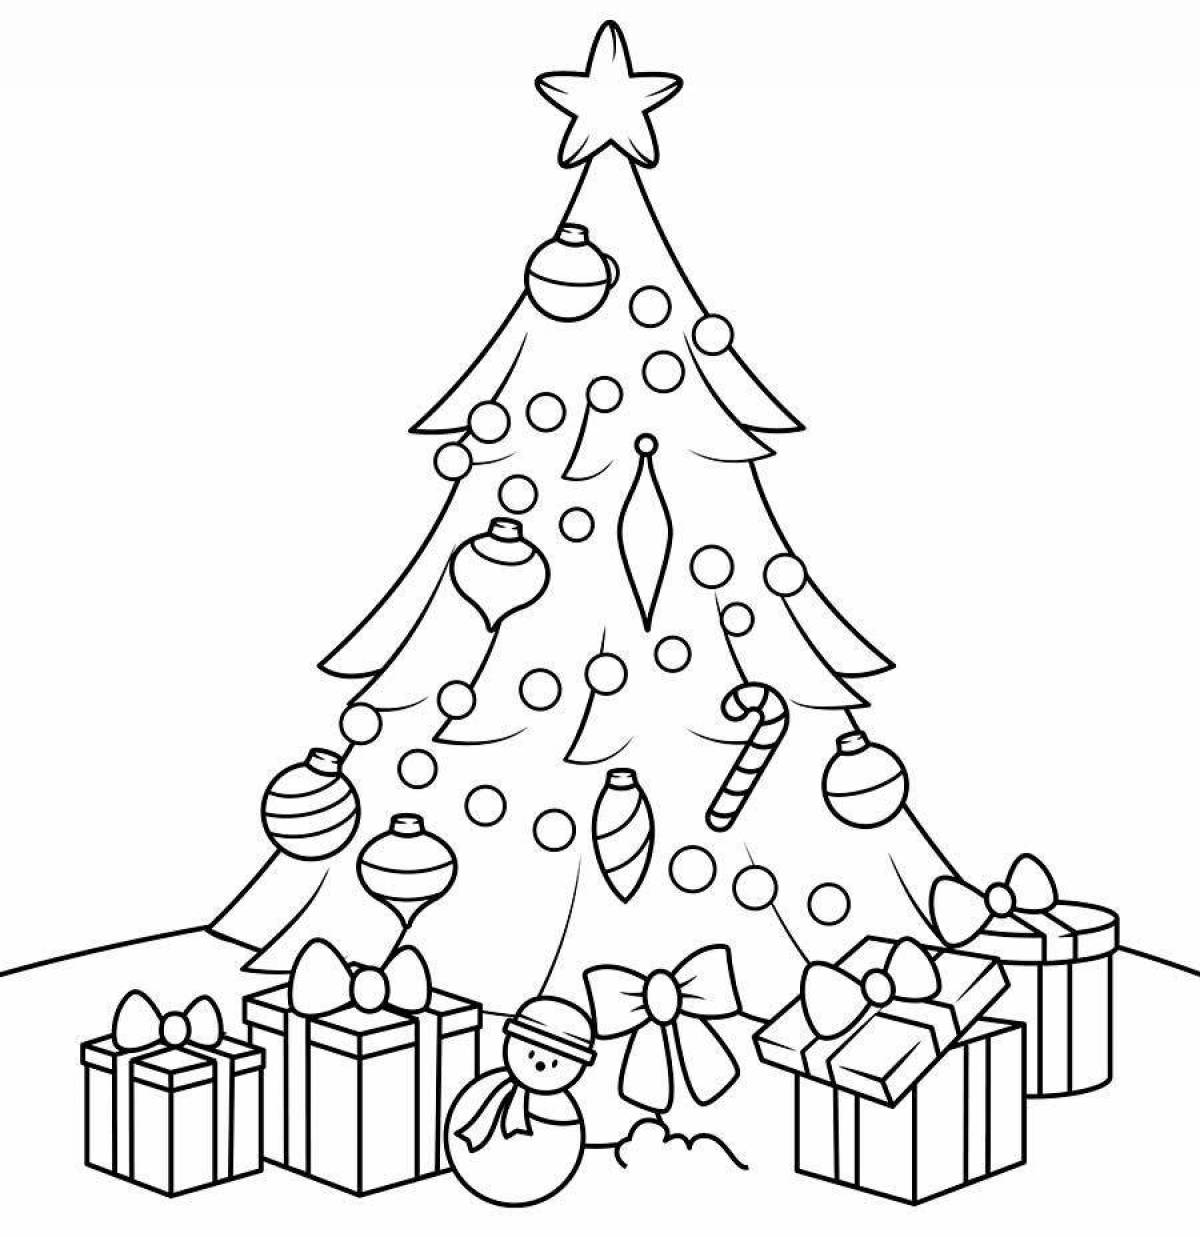 Gorgeous winter tree coloring page